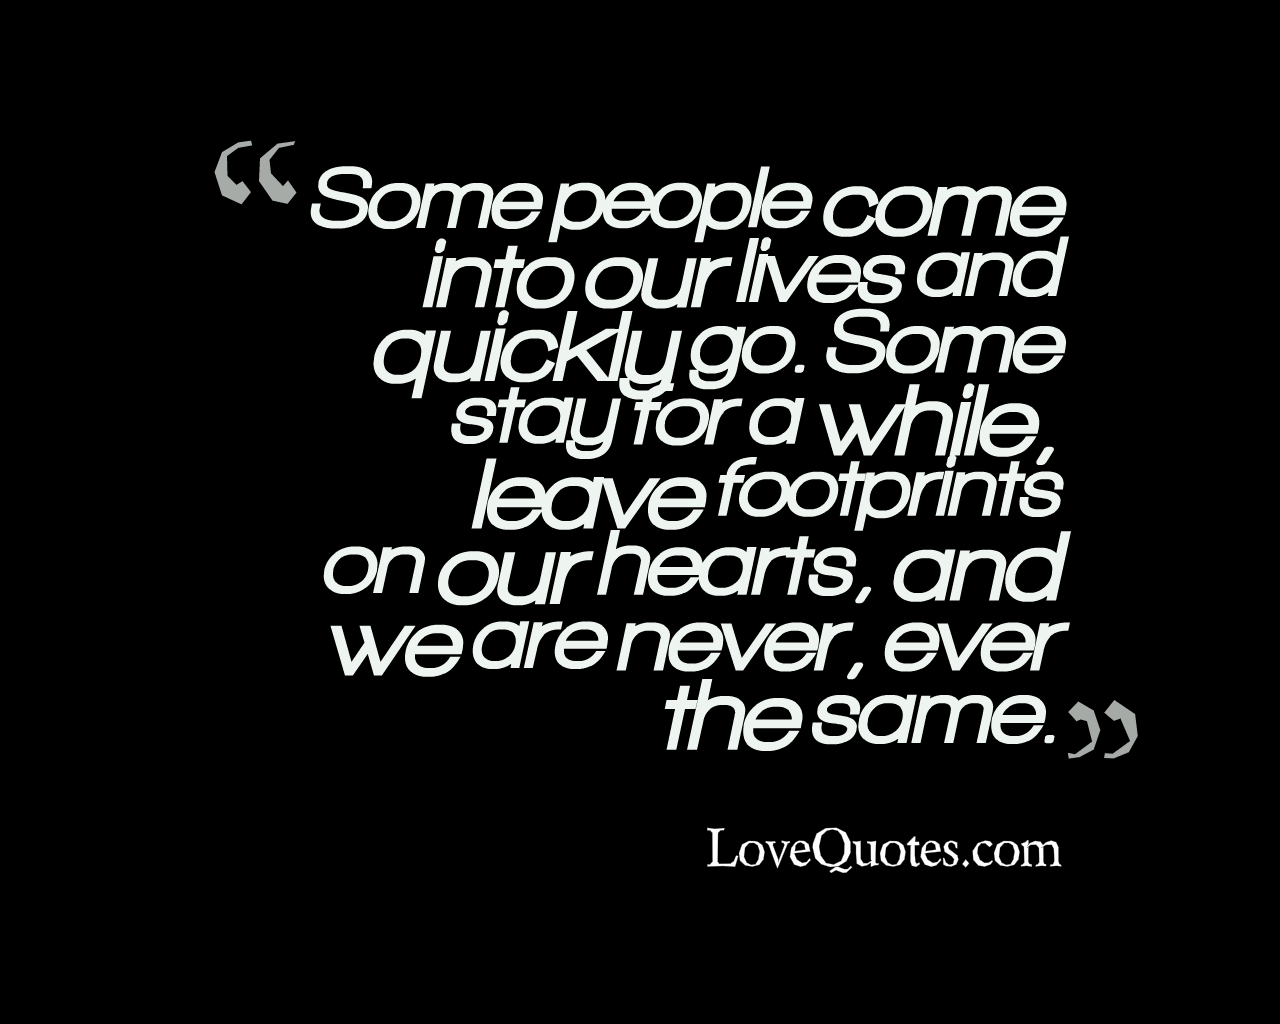 People Come into Our Lives